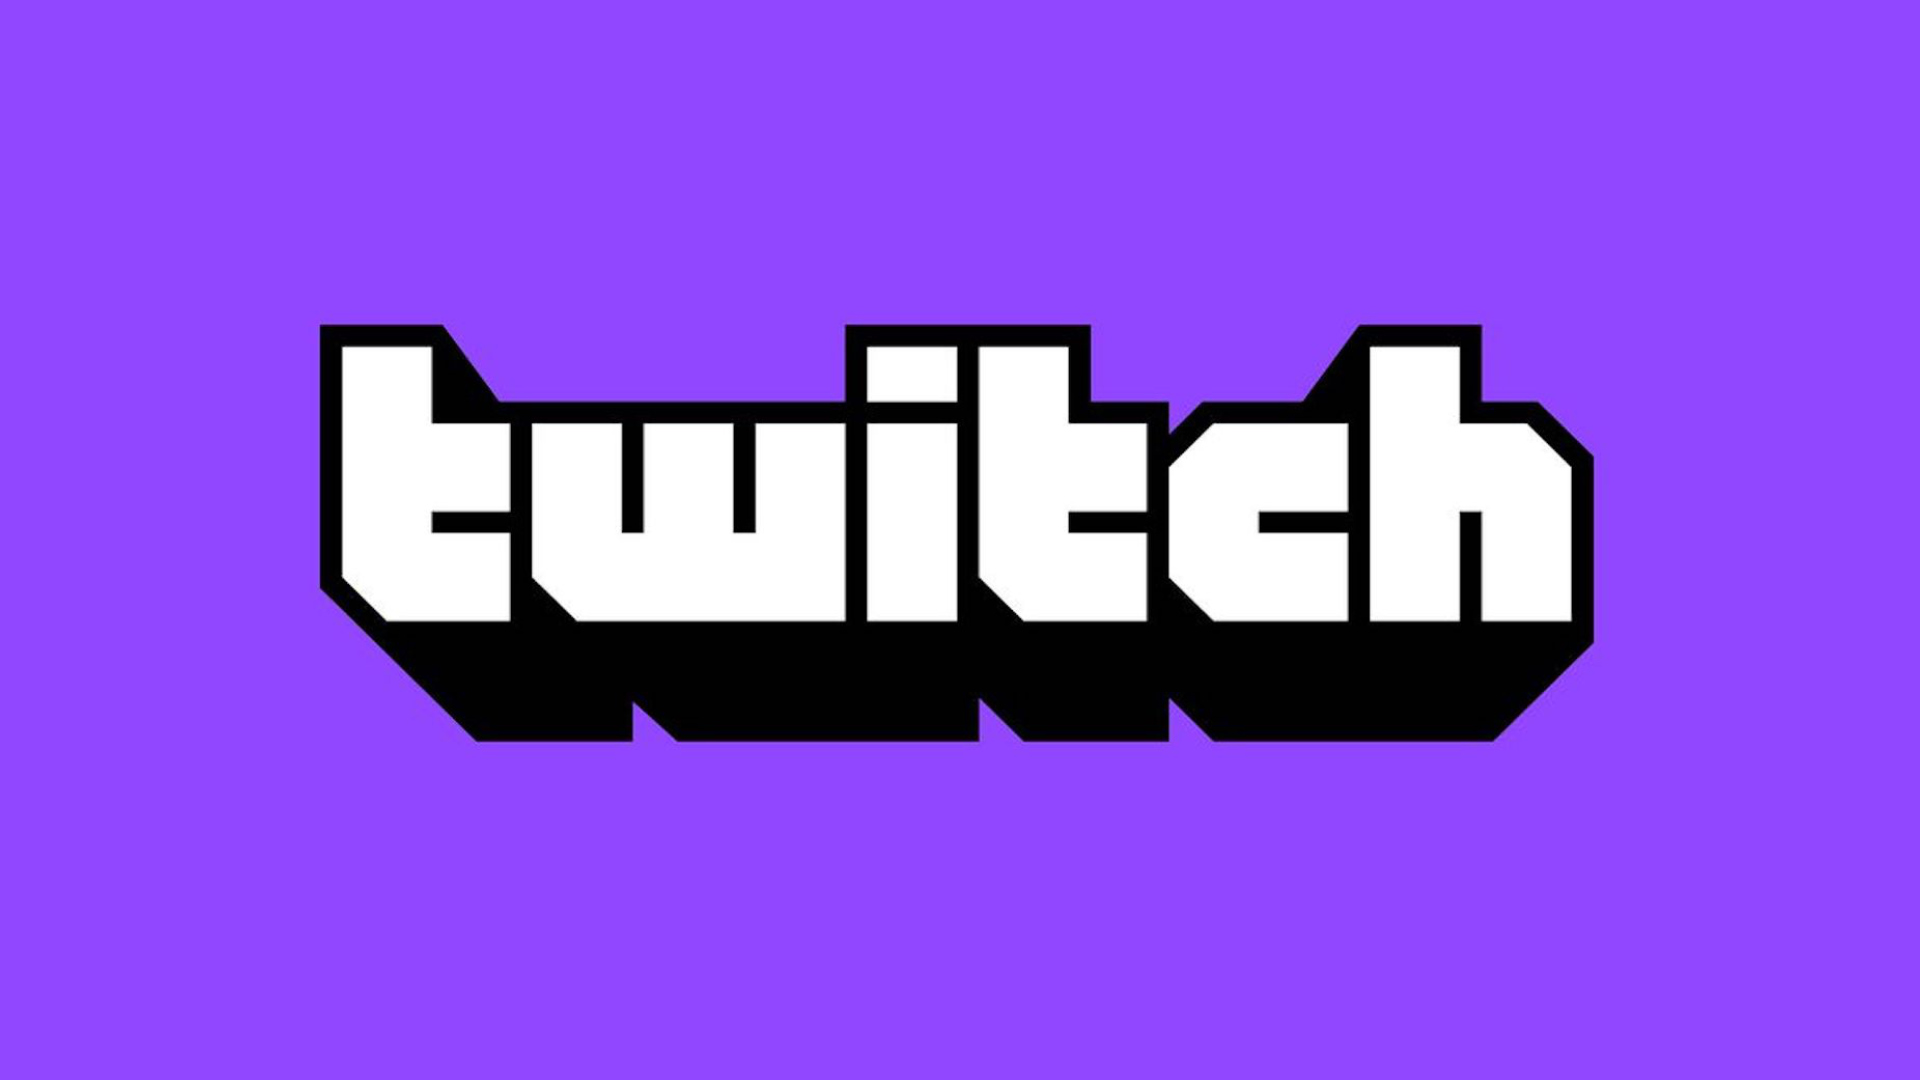 Twitch banners again warn of rights issues

